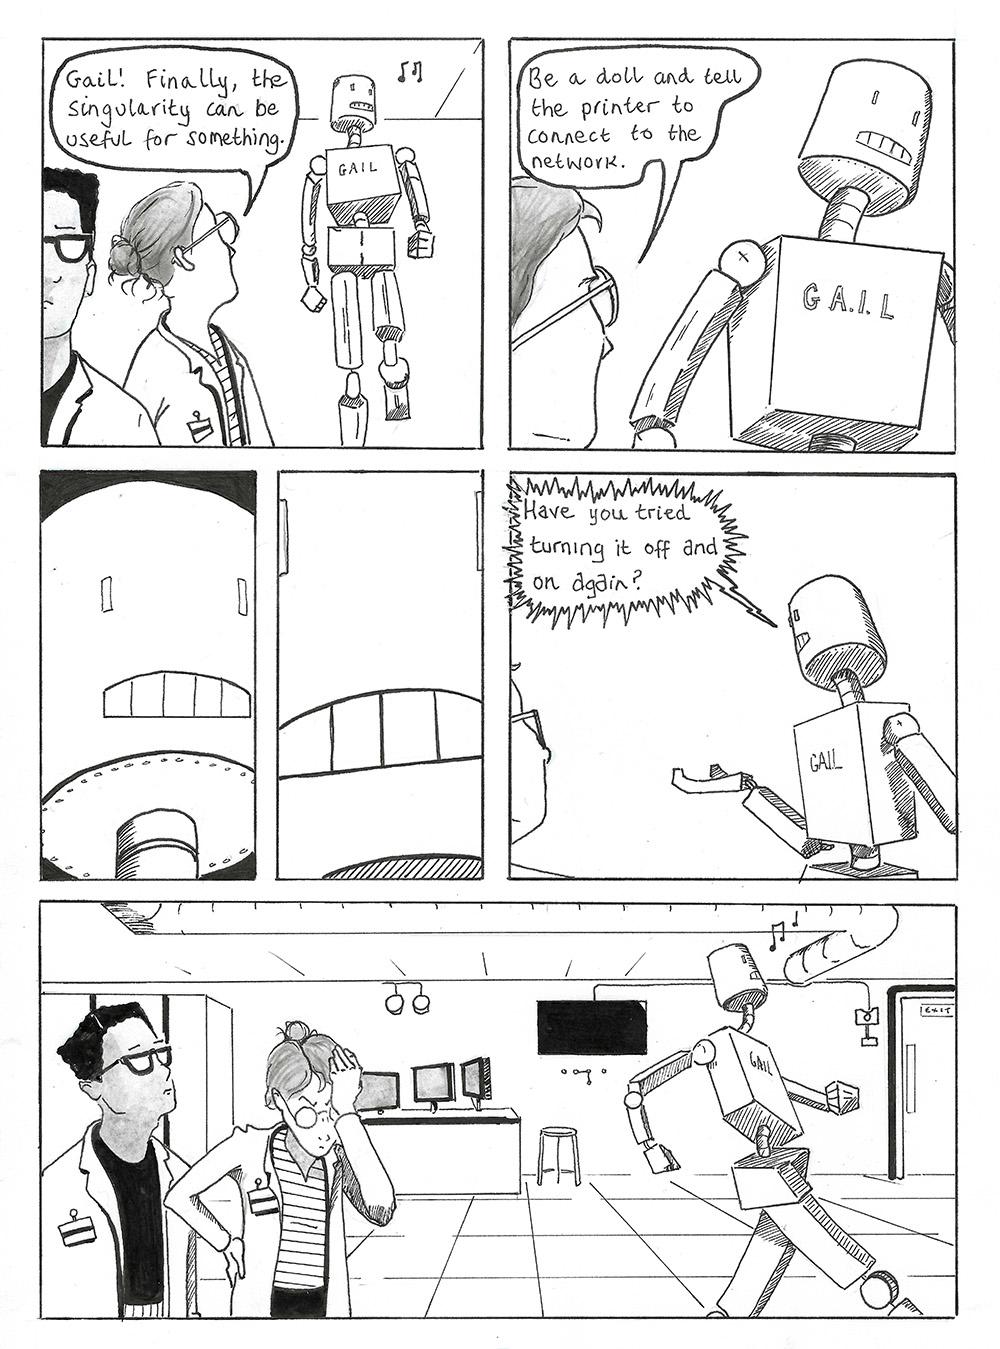 Page 5 of Connection Error, a black and white comic by Adam Westbrook